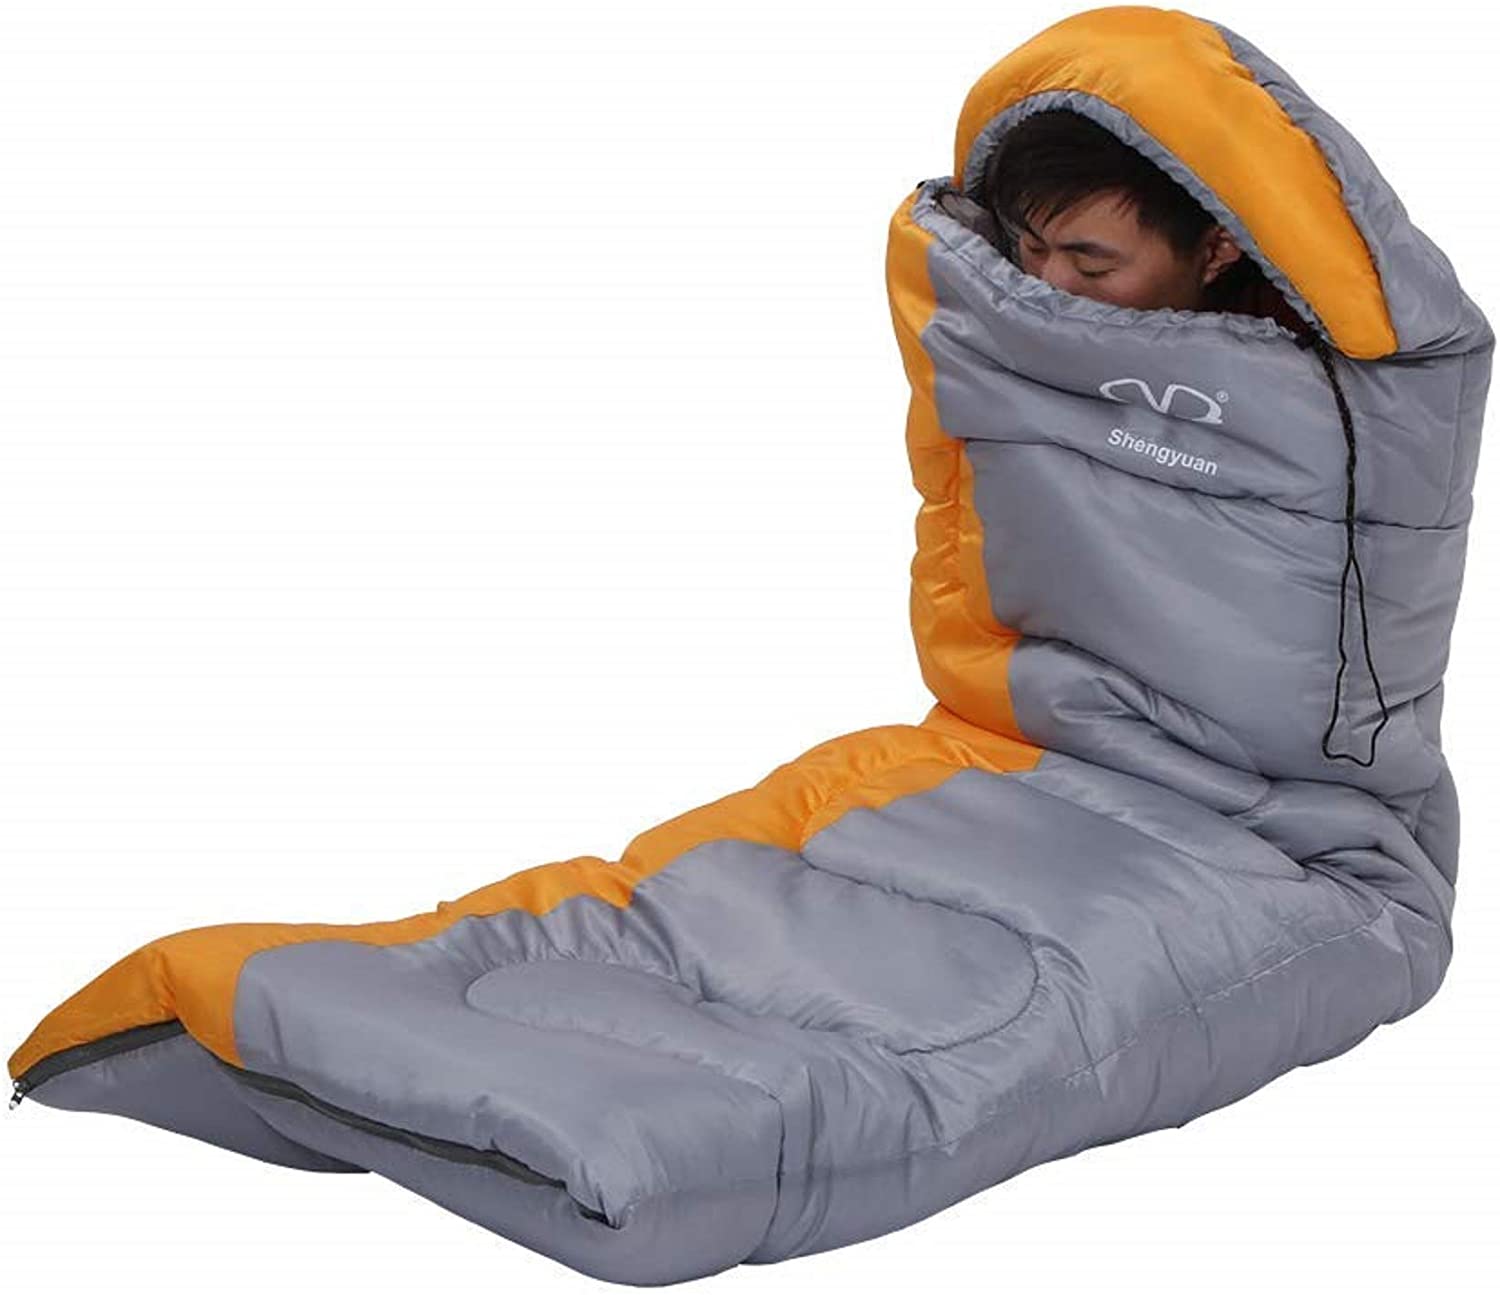 (Out of Stock) Lightweight Portable Waterproof Insulation Sleeping Bag Suit, Orange